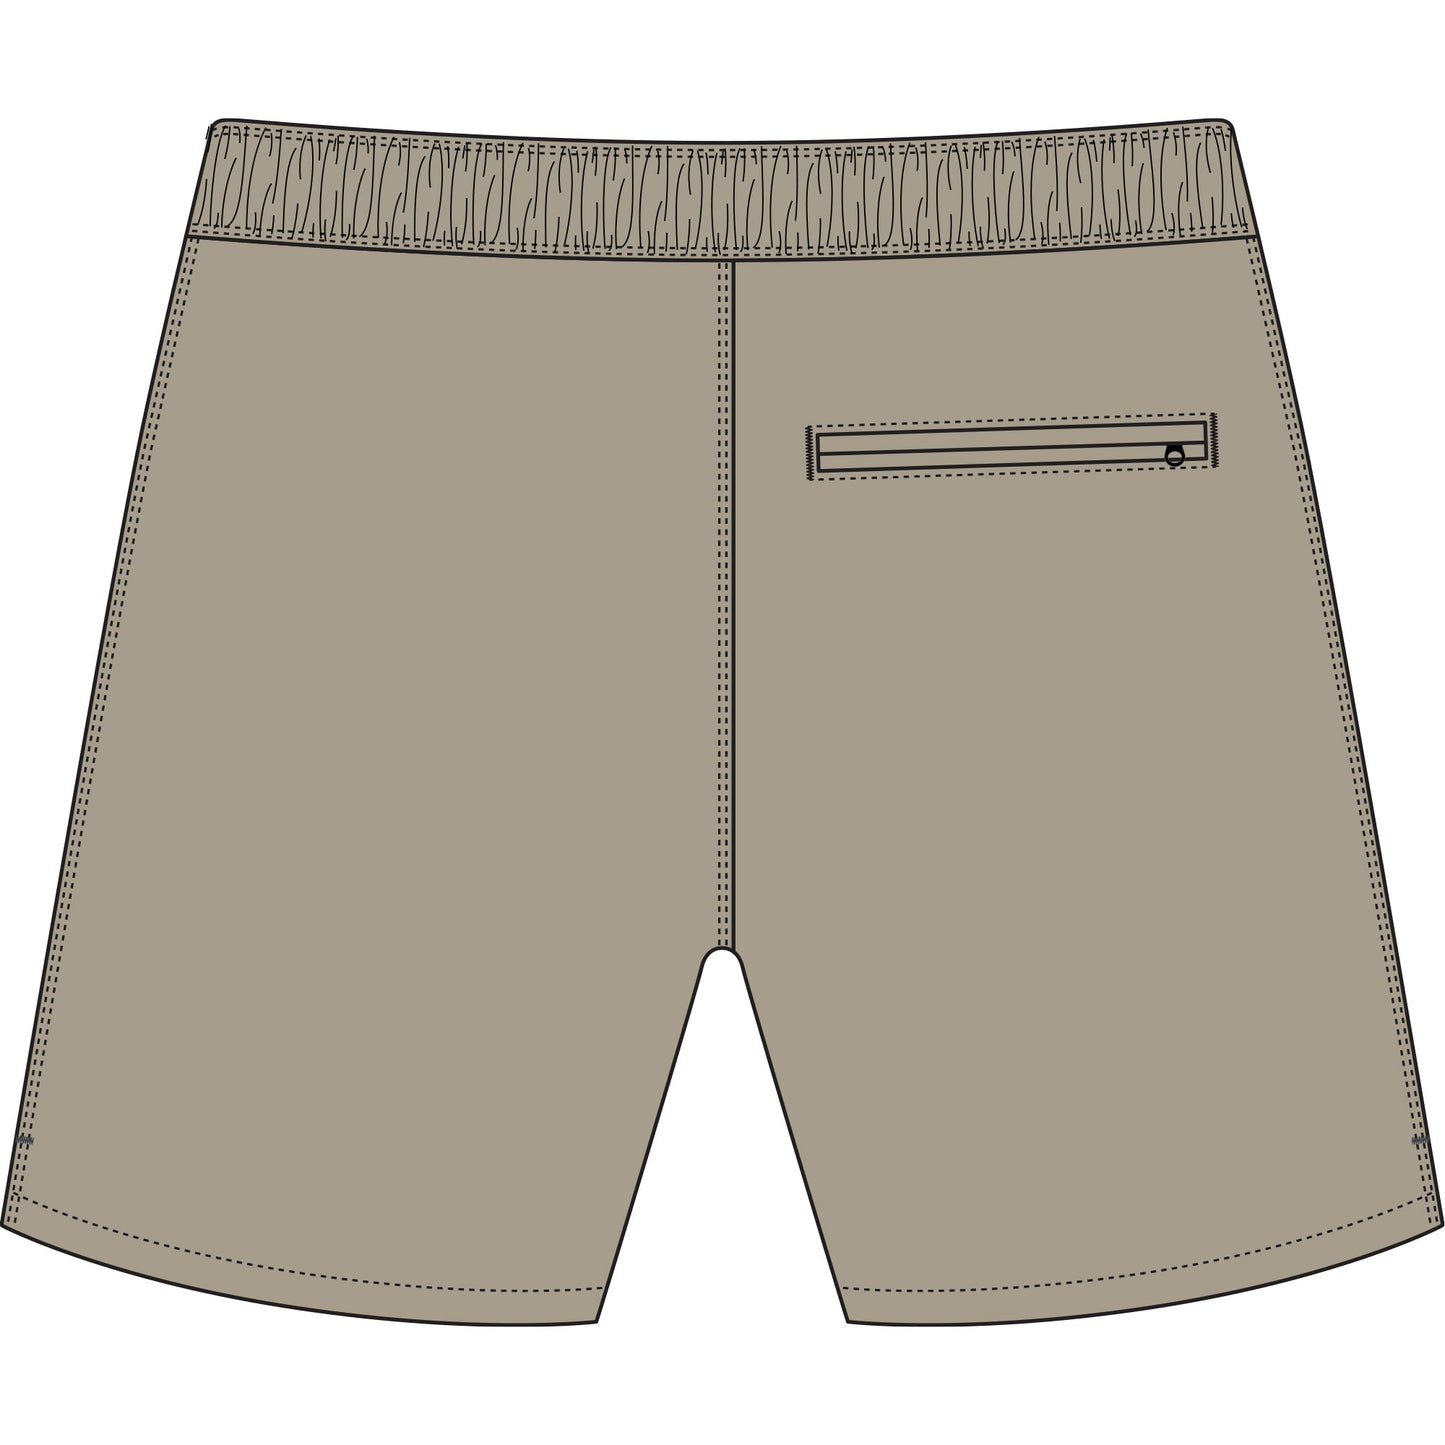 Aftco Youth Strike Shorts - Sand